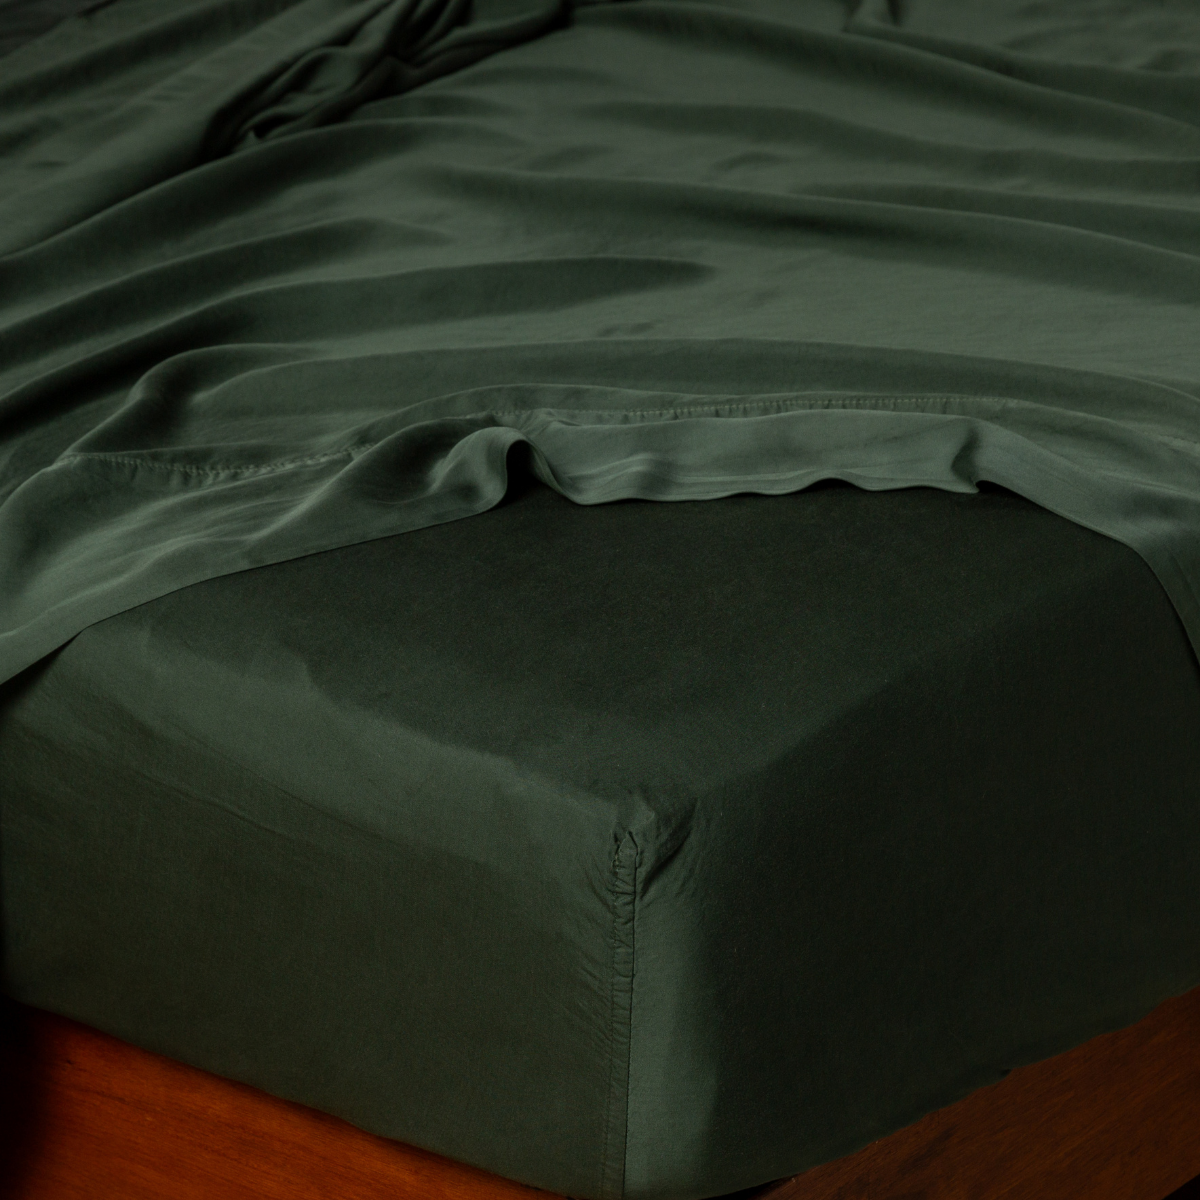 Madera Luxe Twin Fitted Sheets